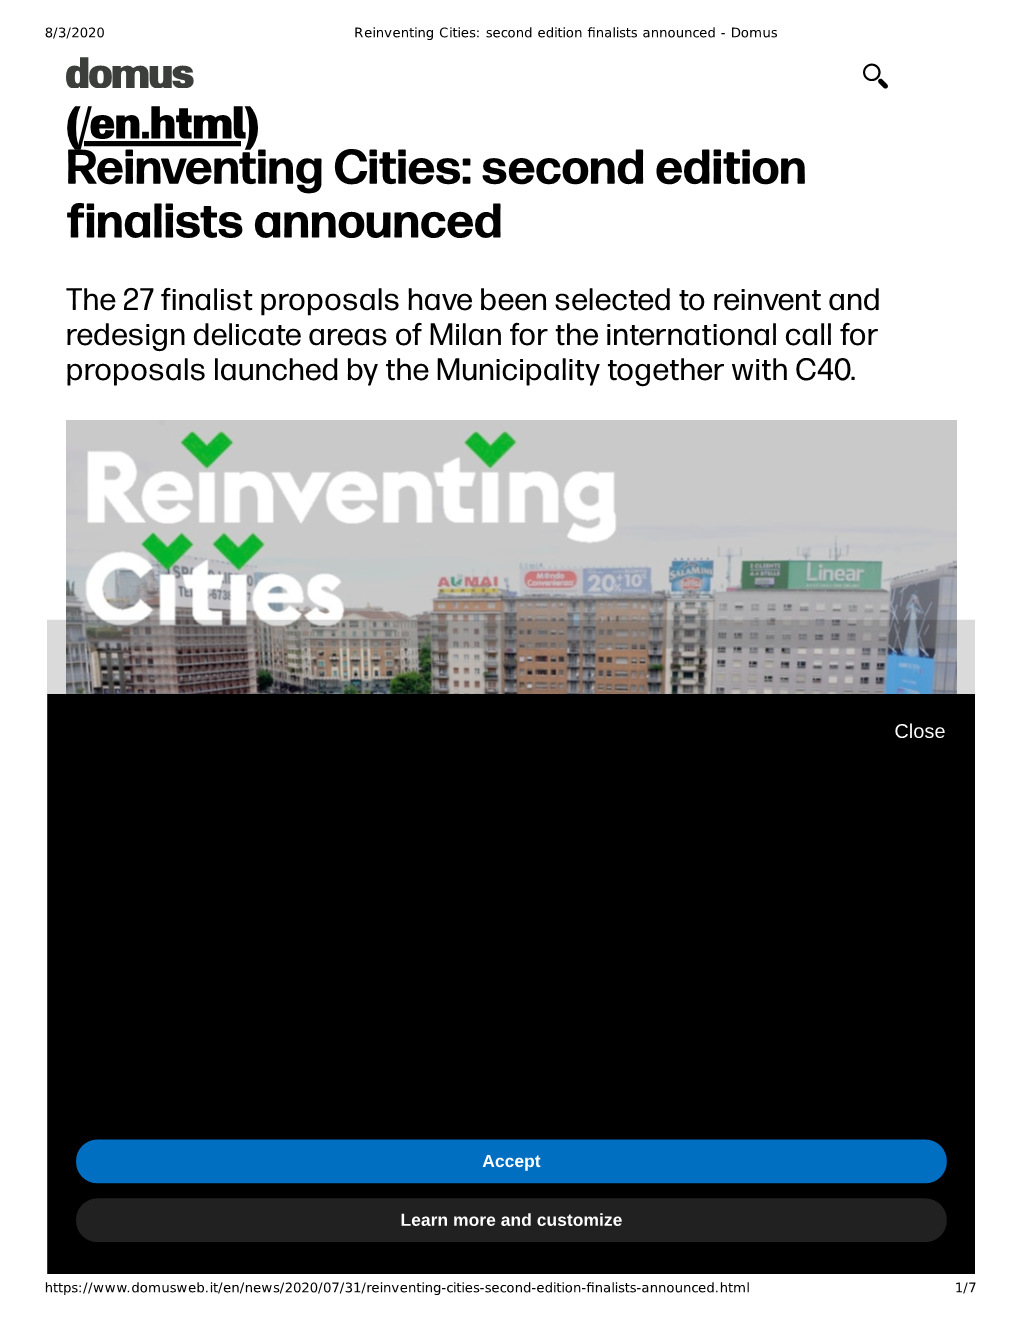 (/En.Html) Reinventing Cities: Second Edition Finalists Announced